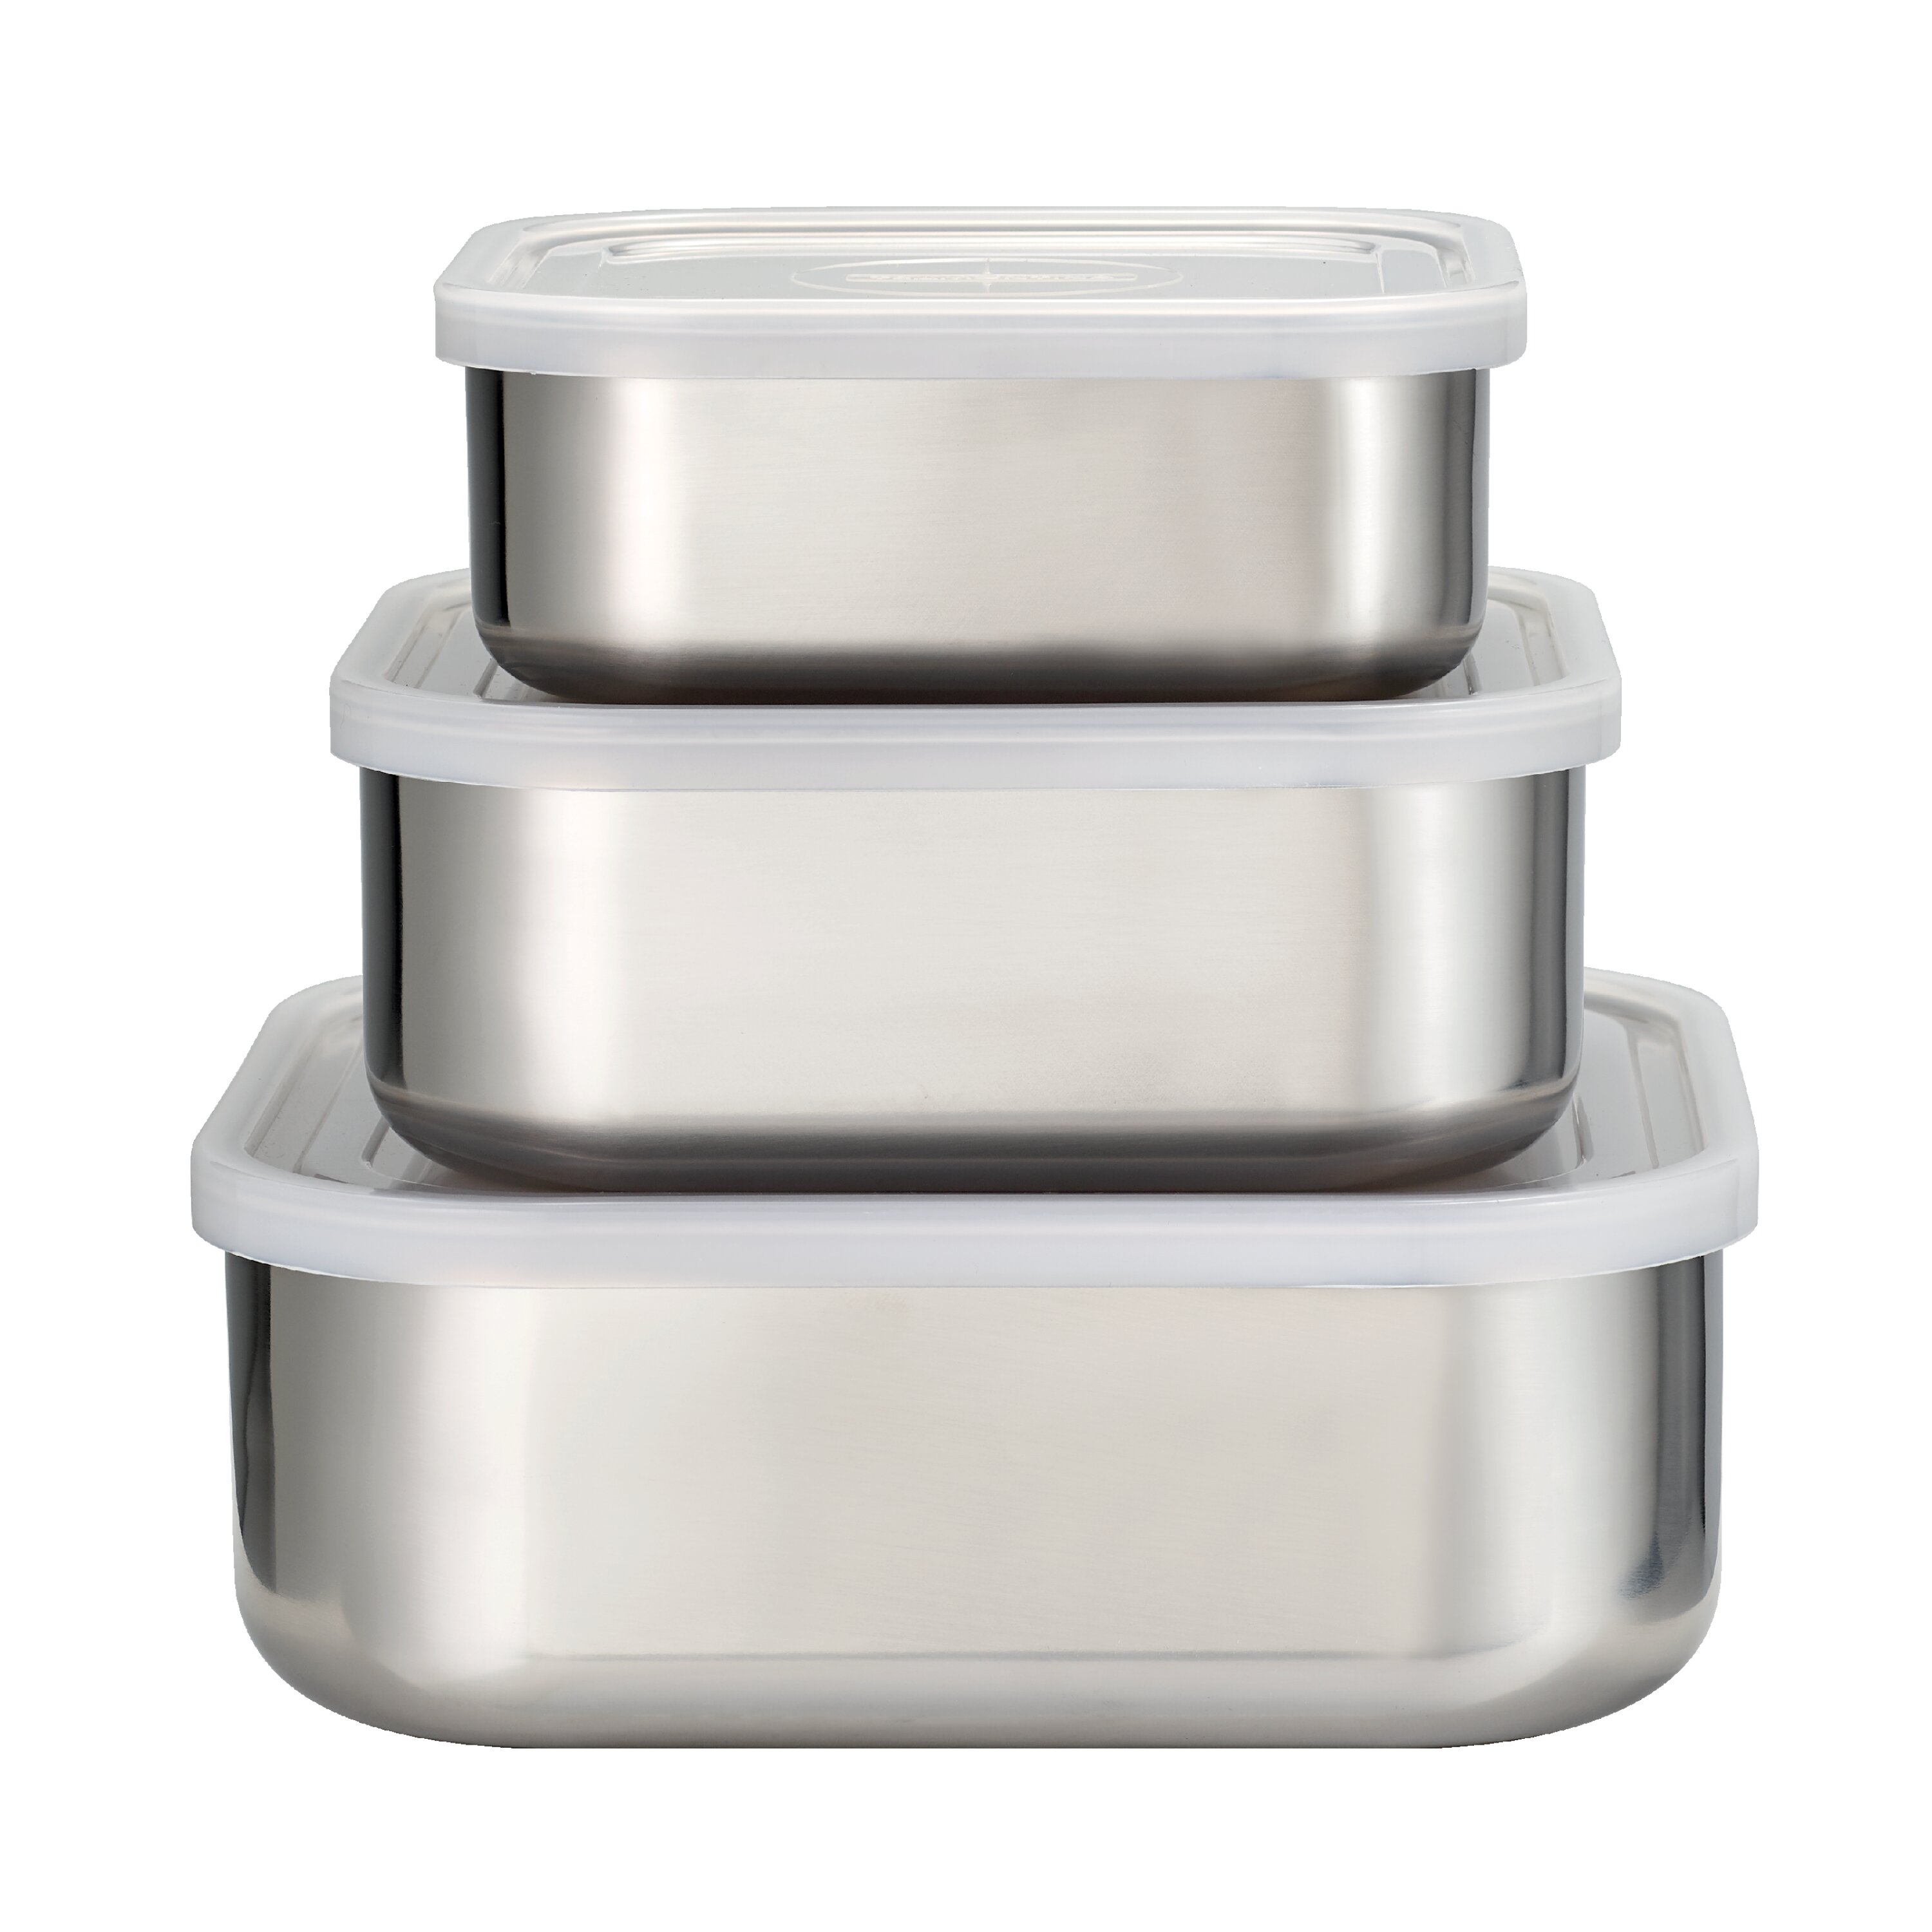 5 Pcs Stainless Steel Container with Lids - Stackable Canisters Sets for  The Kitchen - Refrigerator Organizing Containers Container Storage Mixing